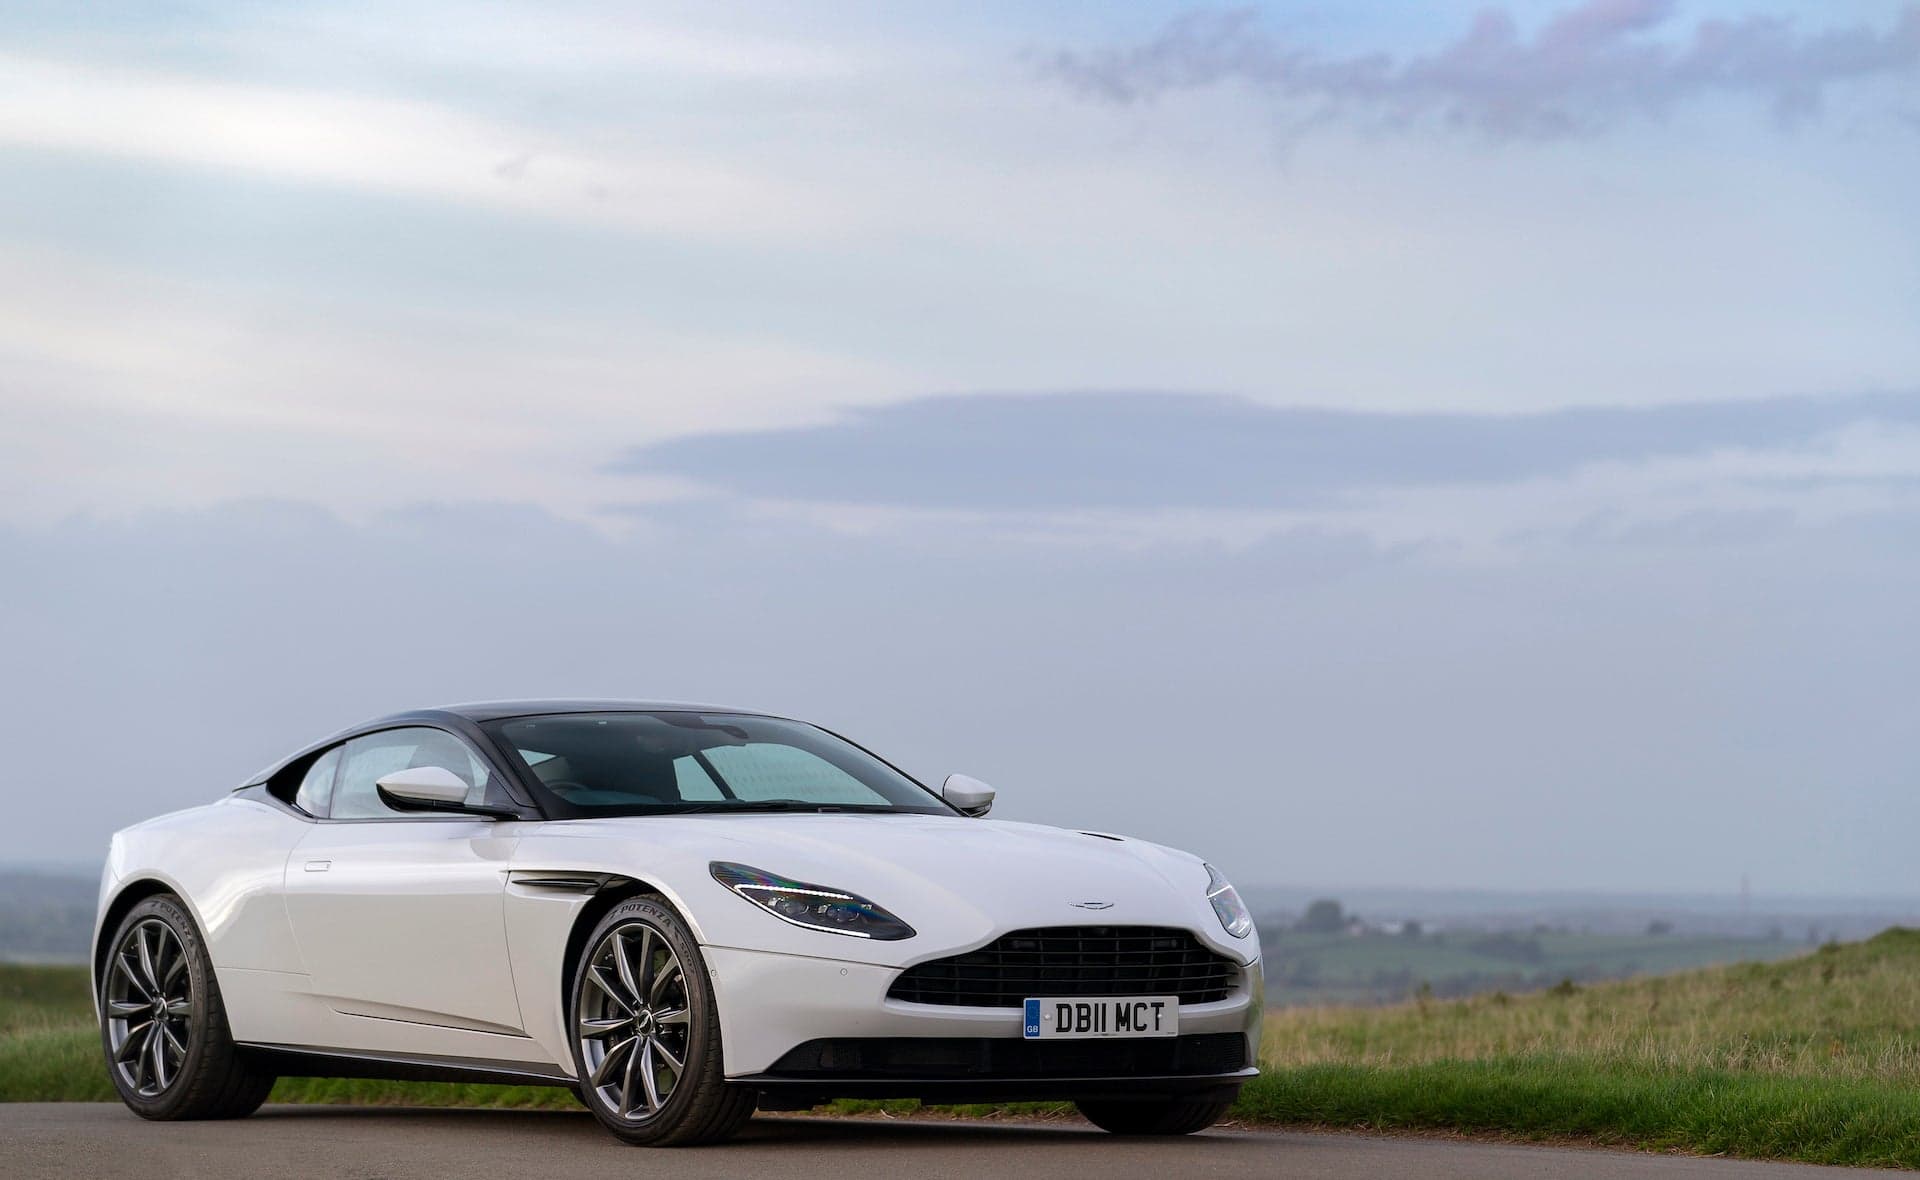 Aston Martin CEO Not Worried About Future of Internal Combustion Amidst EV Surge